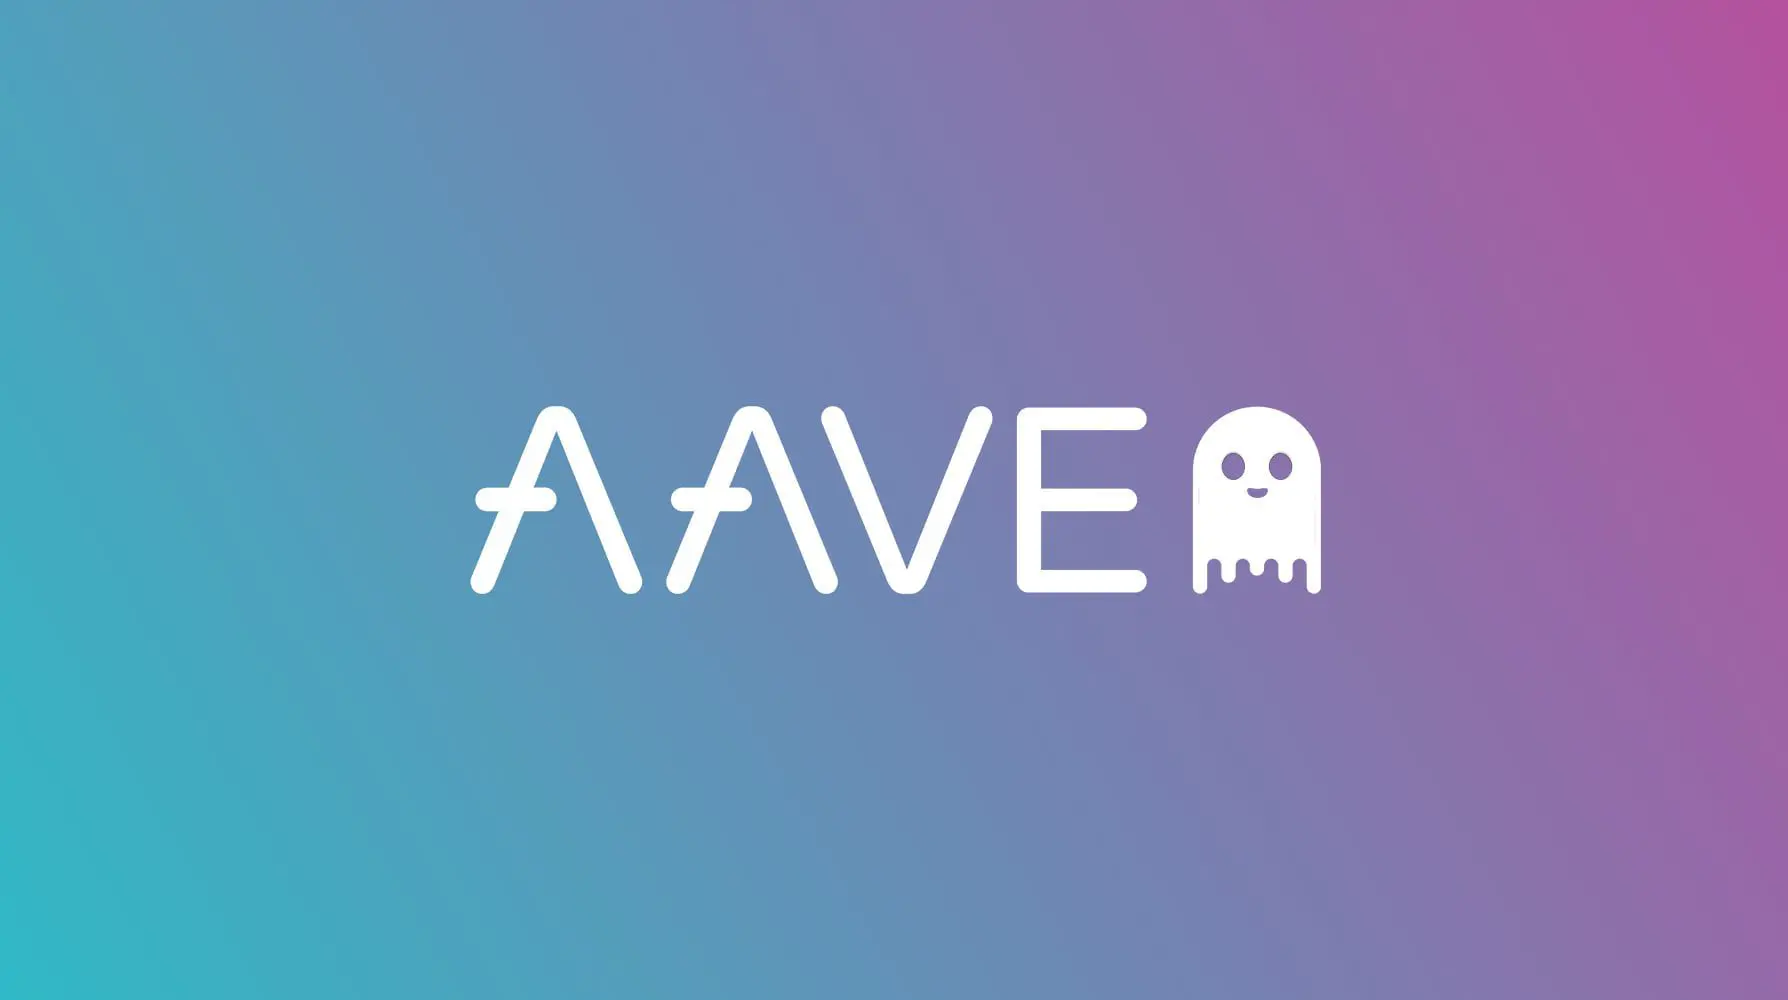 Cover Image for Aave v3 bug bounty part 1: Security concerns and improvements about the `executeFlashLoan` function